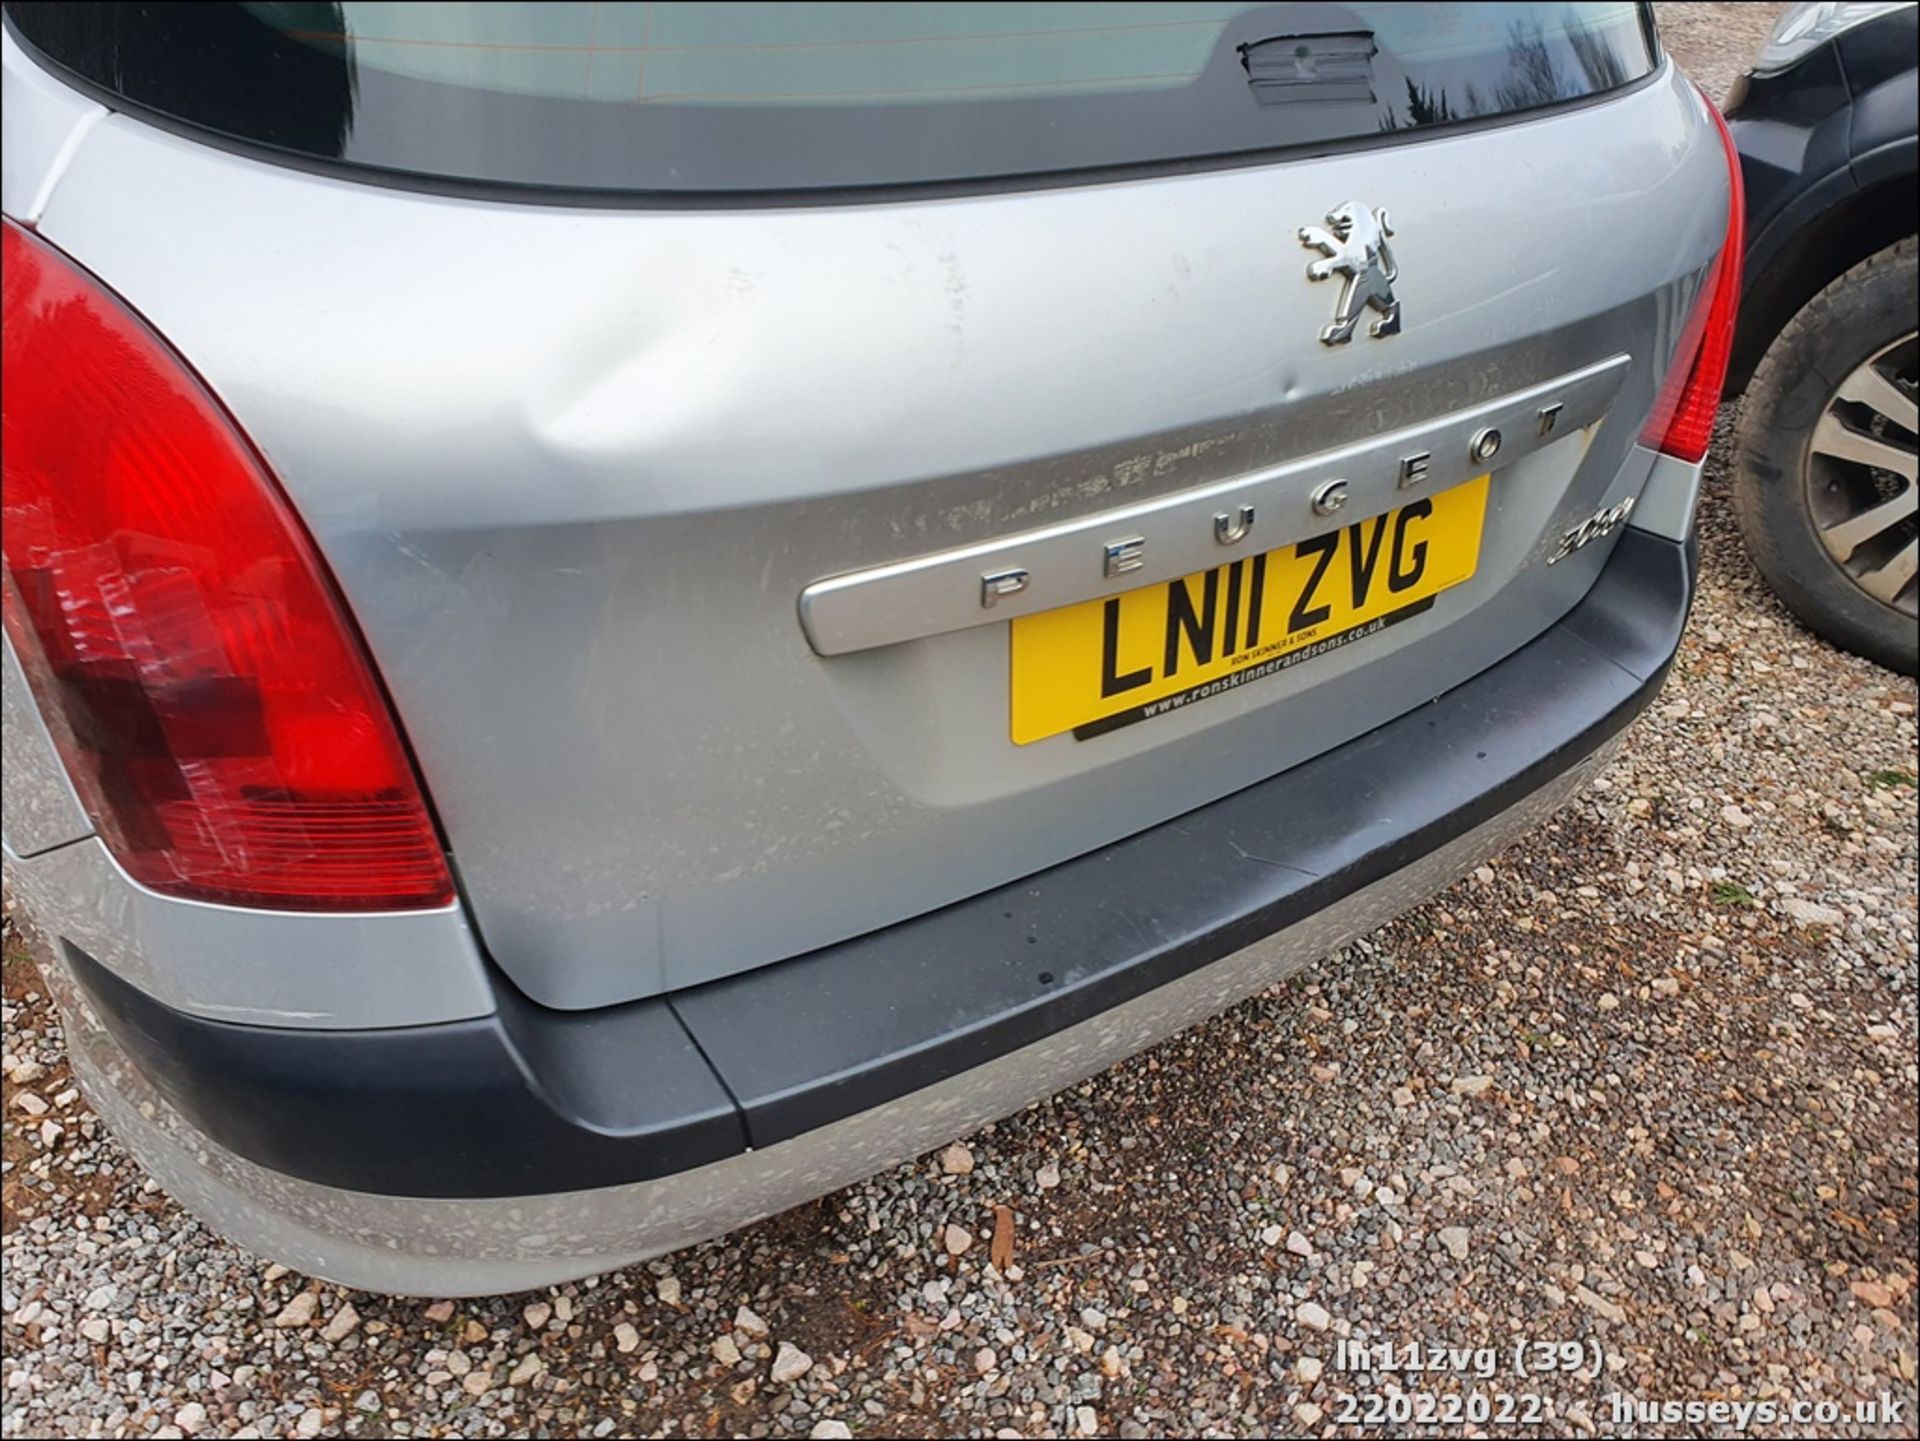 11/11 PEUGEOT 308 S SW HDI 92 - 1560cc 5dr Estate (Silver, 115k) - Image 39 of 46